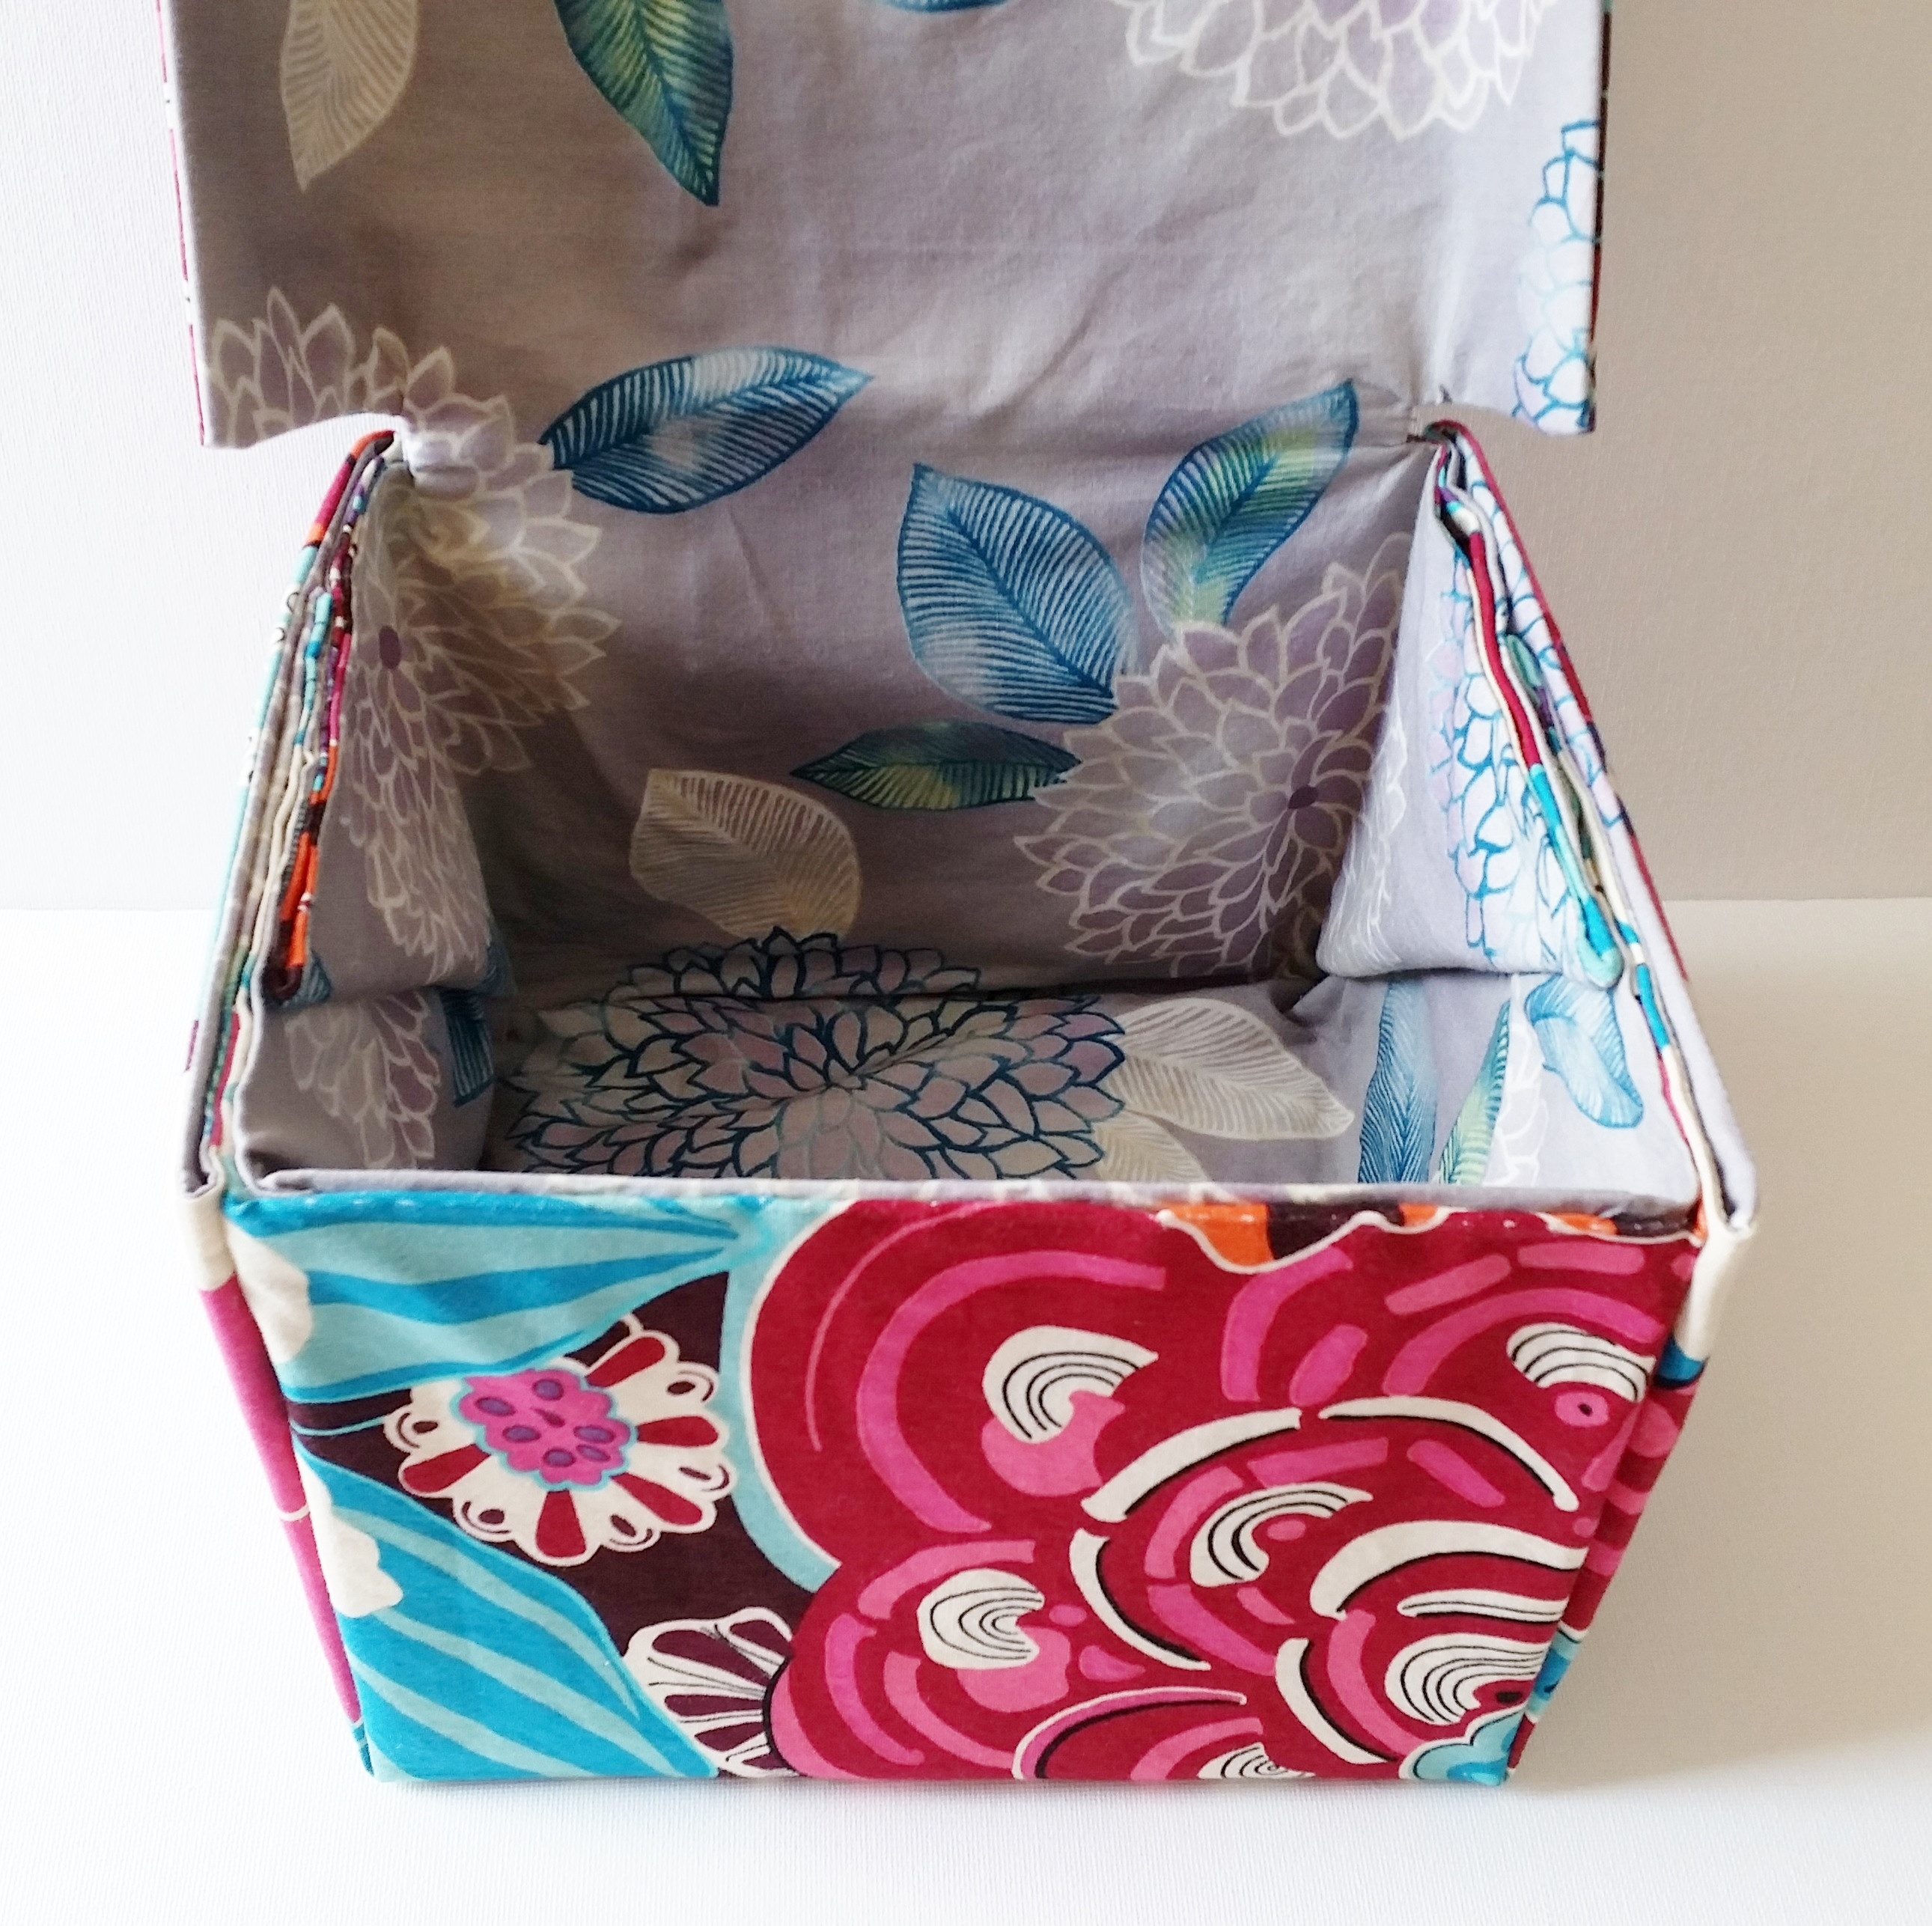 Fabric Boxes DIY
 DIY Fabric Box With Lid Tutorial